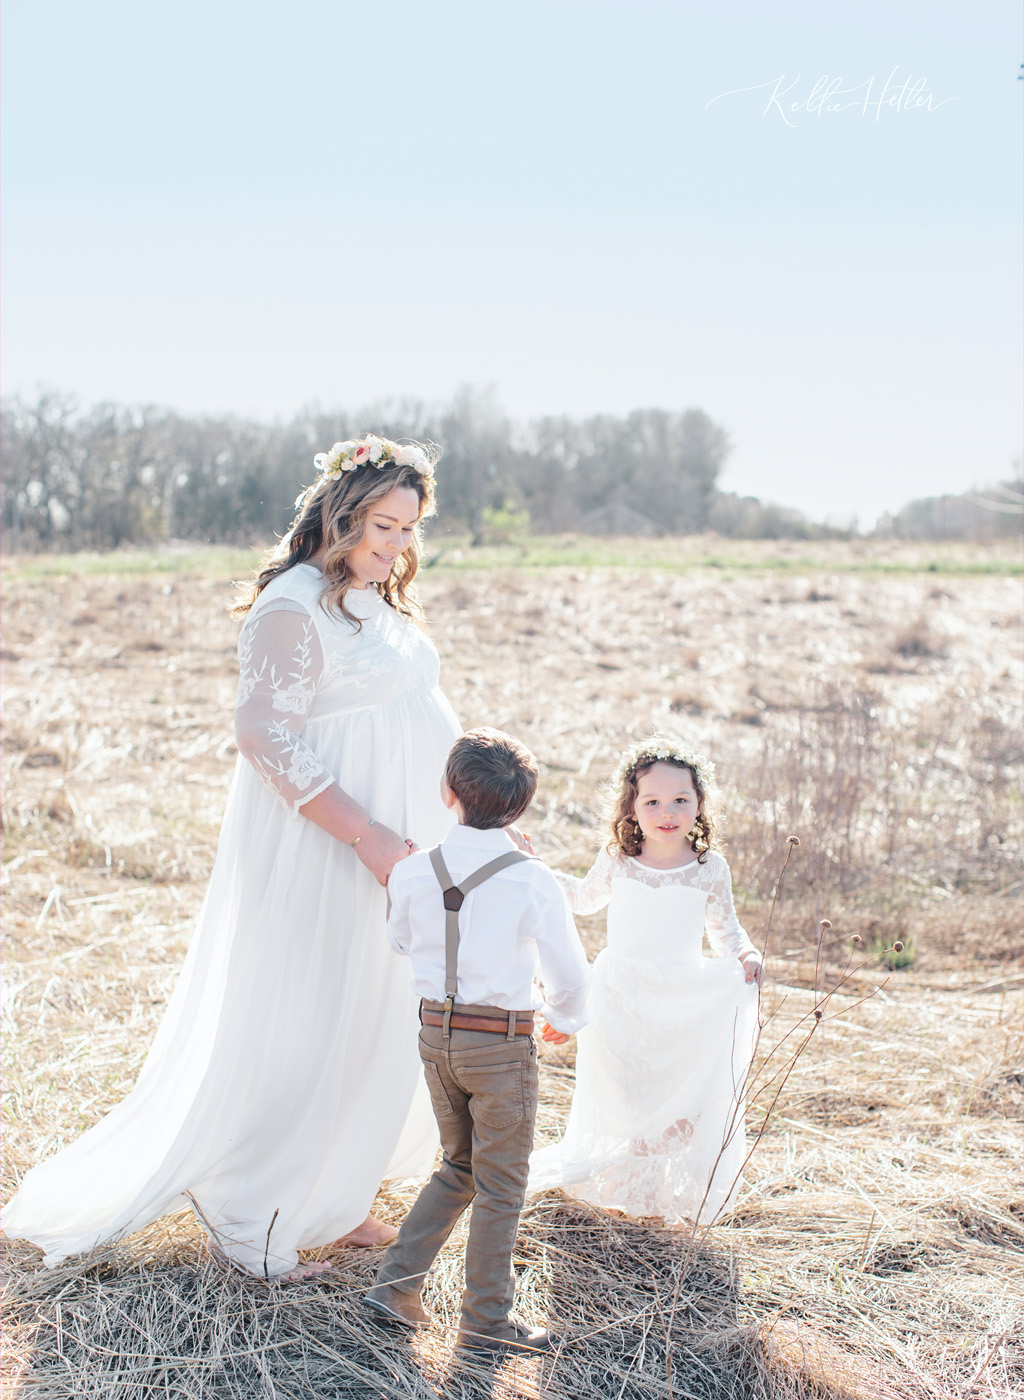 Expectant mom with kids in field with white dress